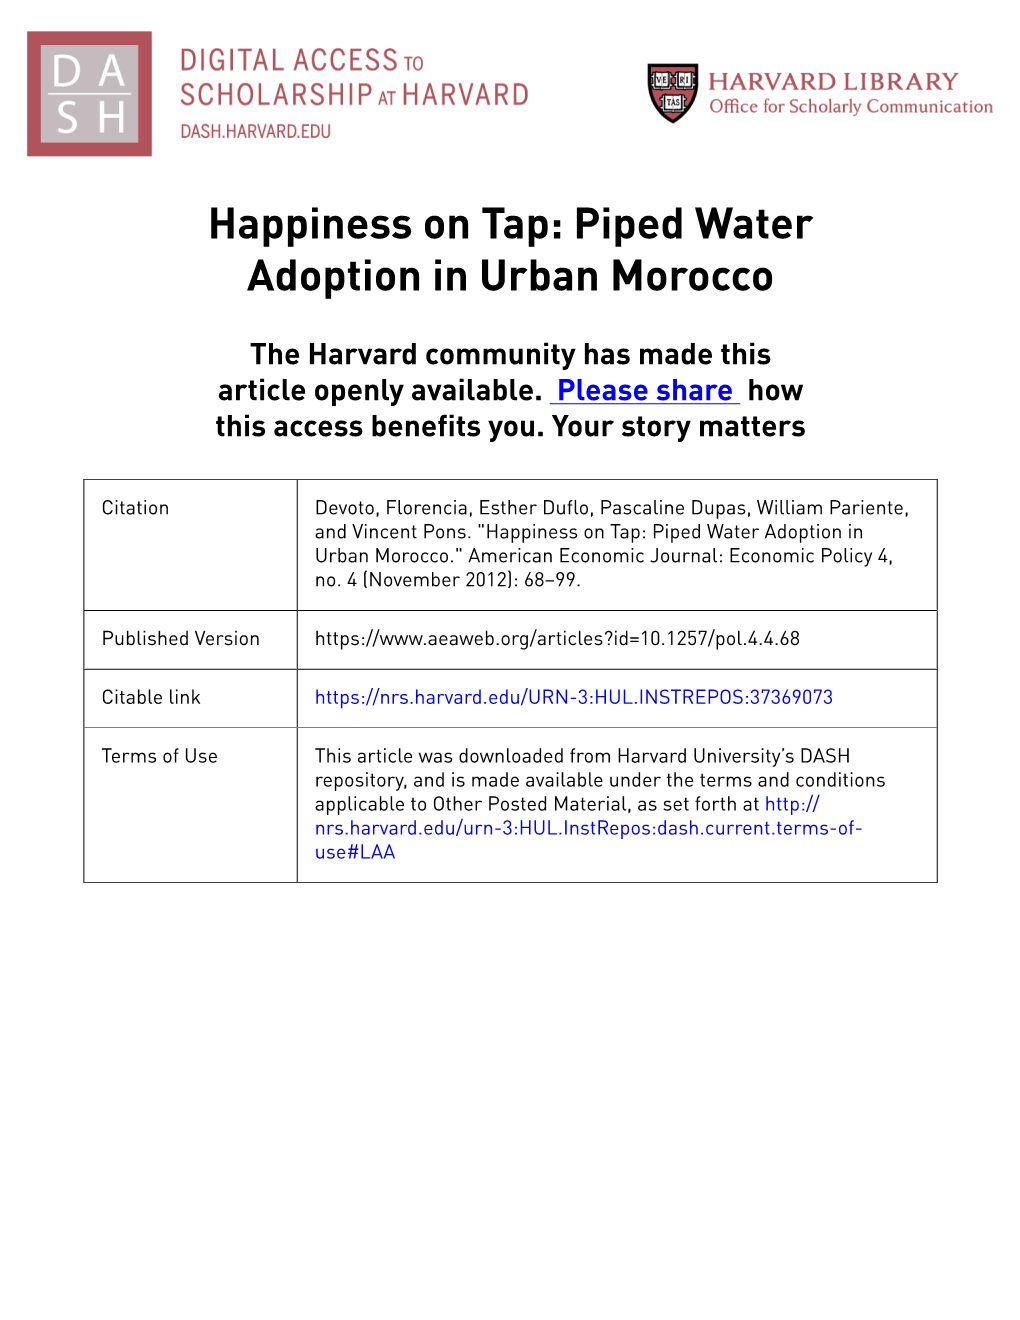 Happiness on Tap: Piped Water Adoption in Urban Morocco